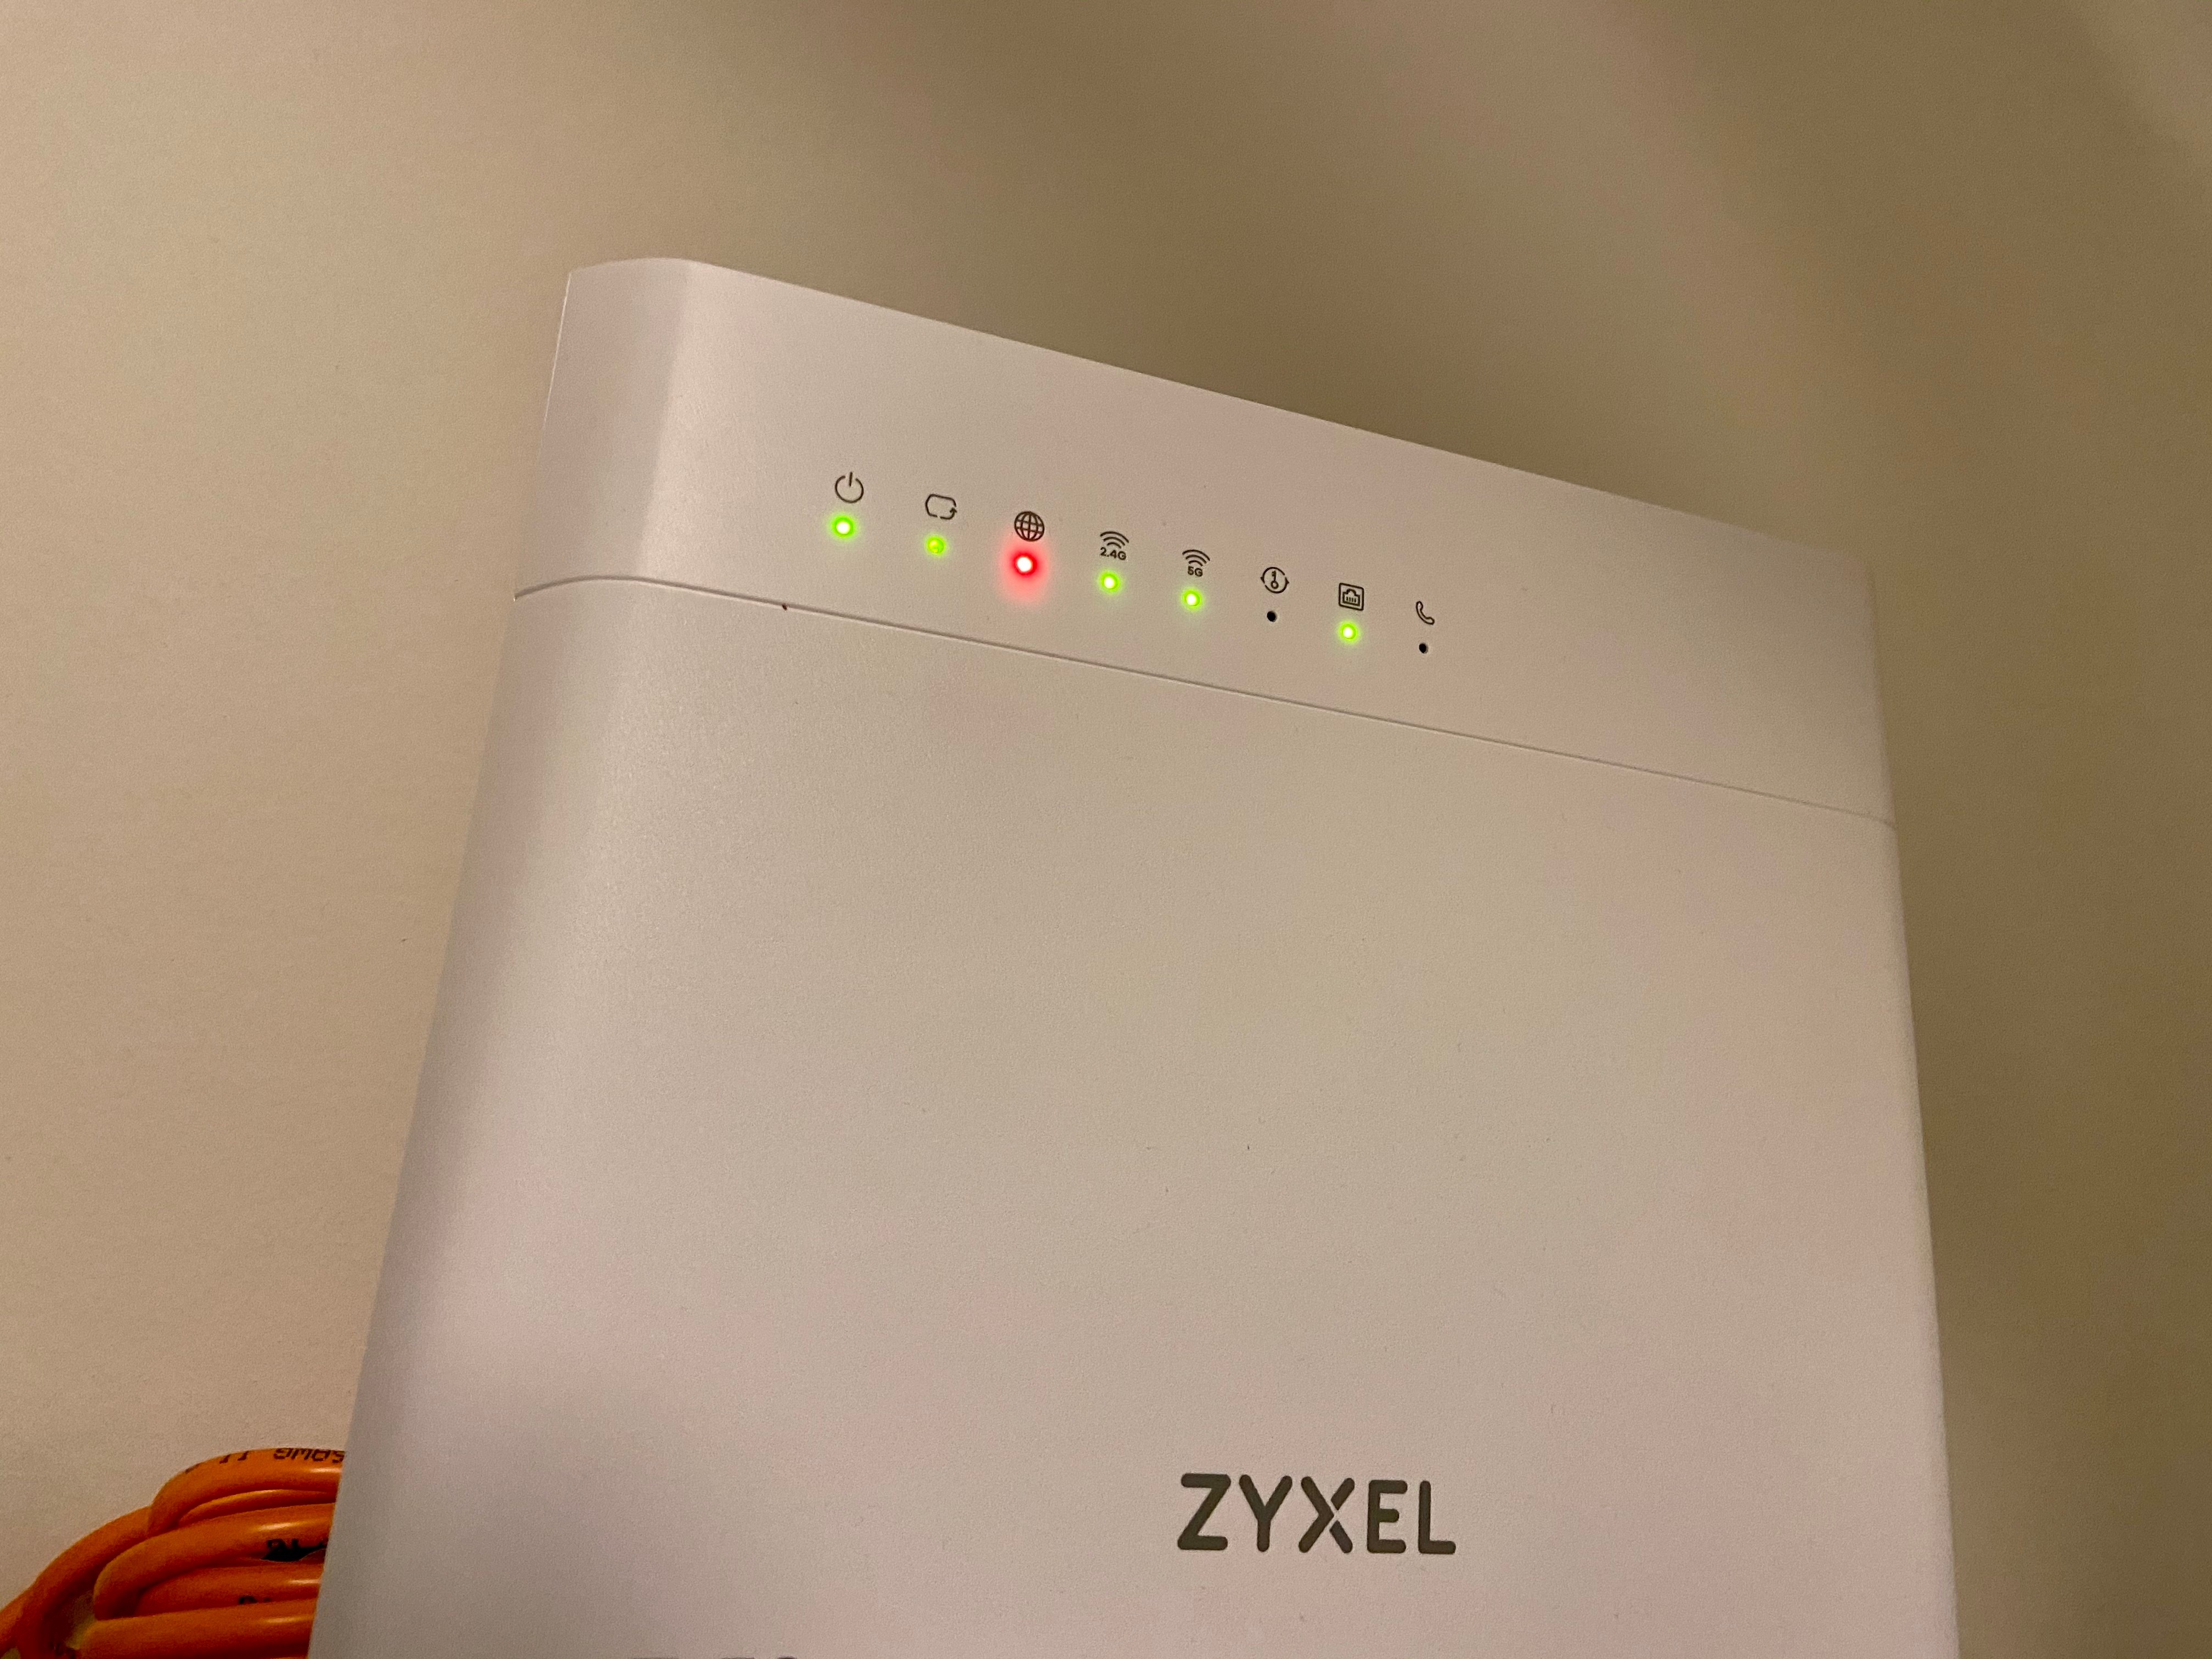 Exemption valve Misty No internet -both wired and wifi, modem zyxel t50 with red light indicator  and media converter | T-Mobile Community